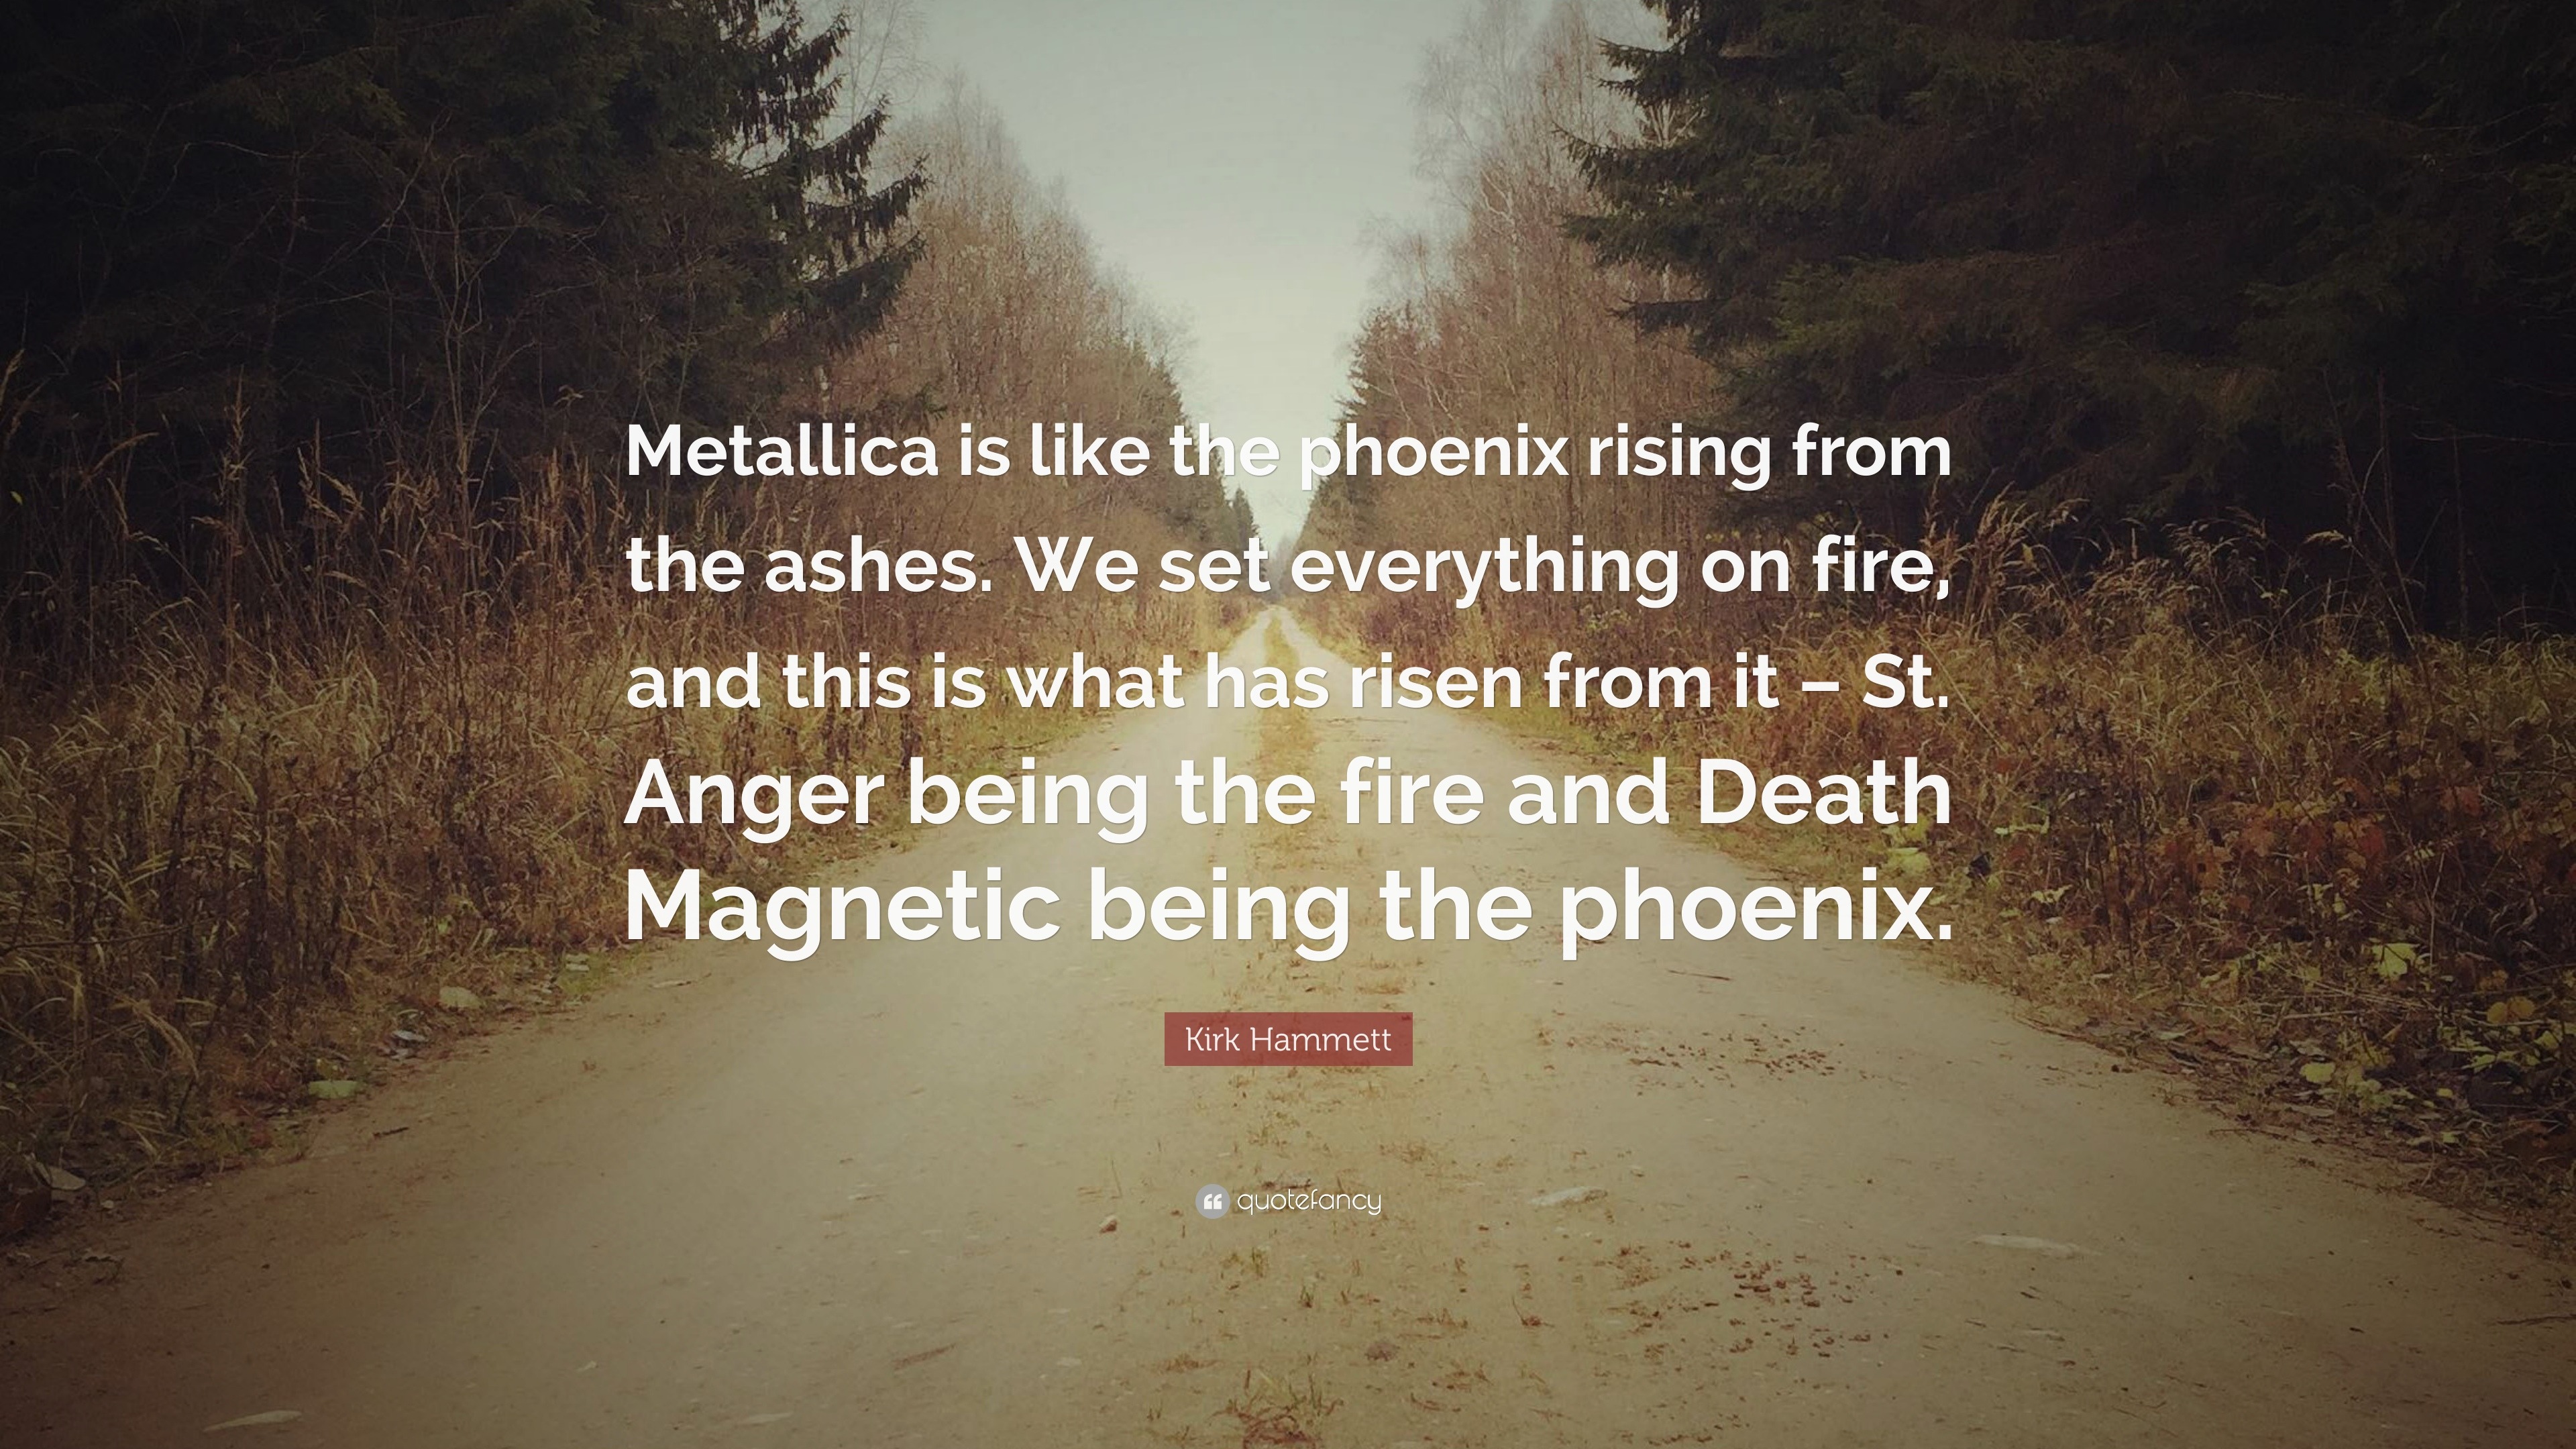 Kirk Hammett Quote Metallica Is Like The Phoenix Rising From The Ashes We Set Everything On Fire And This Is What Has Risen From It St